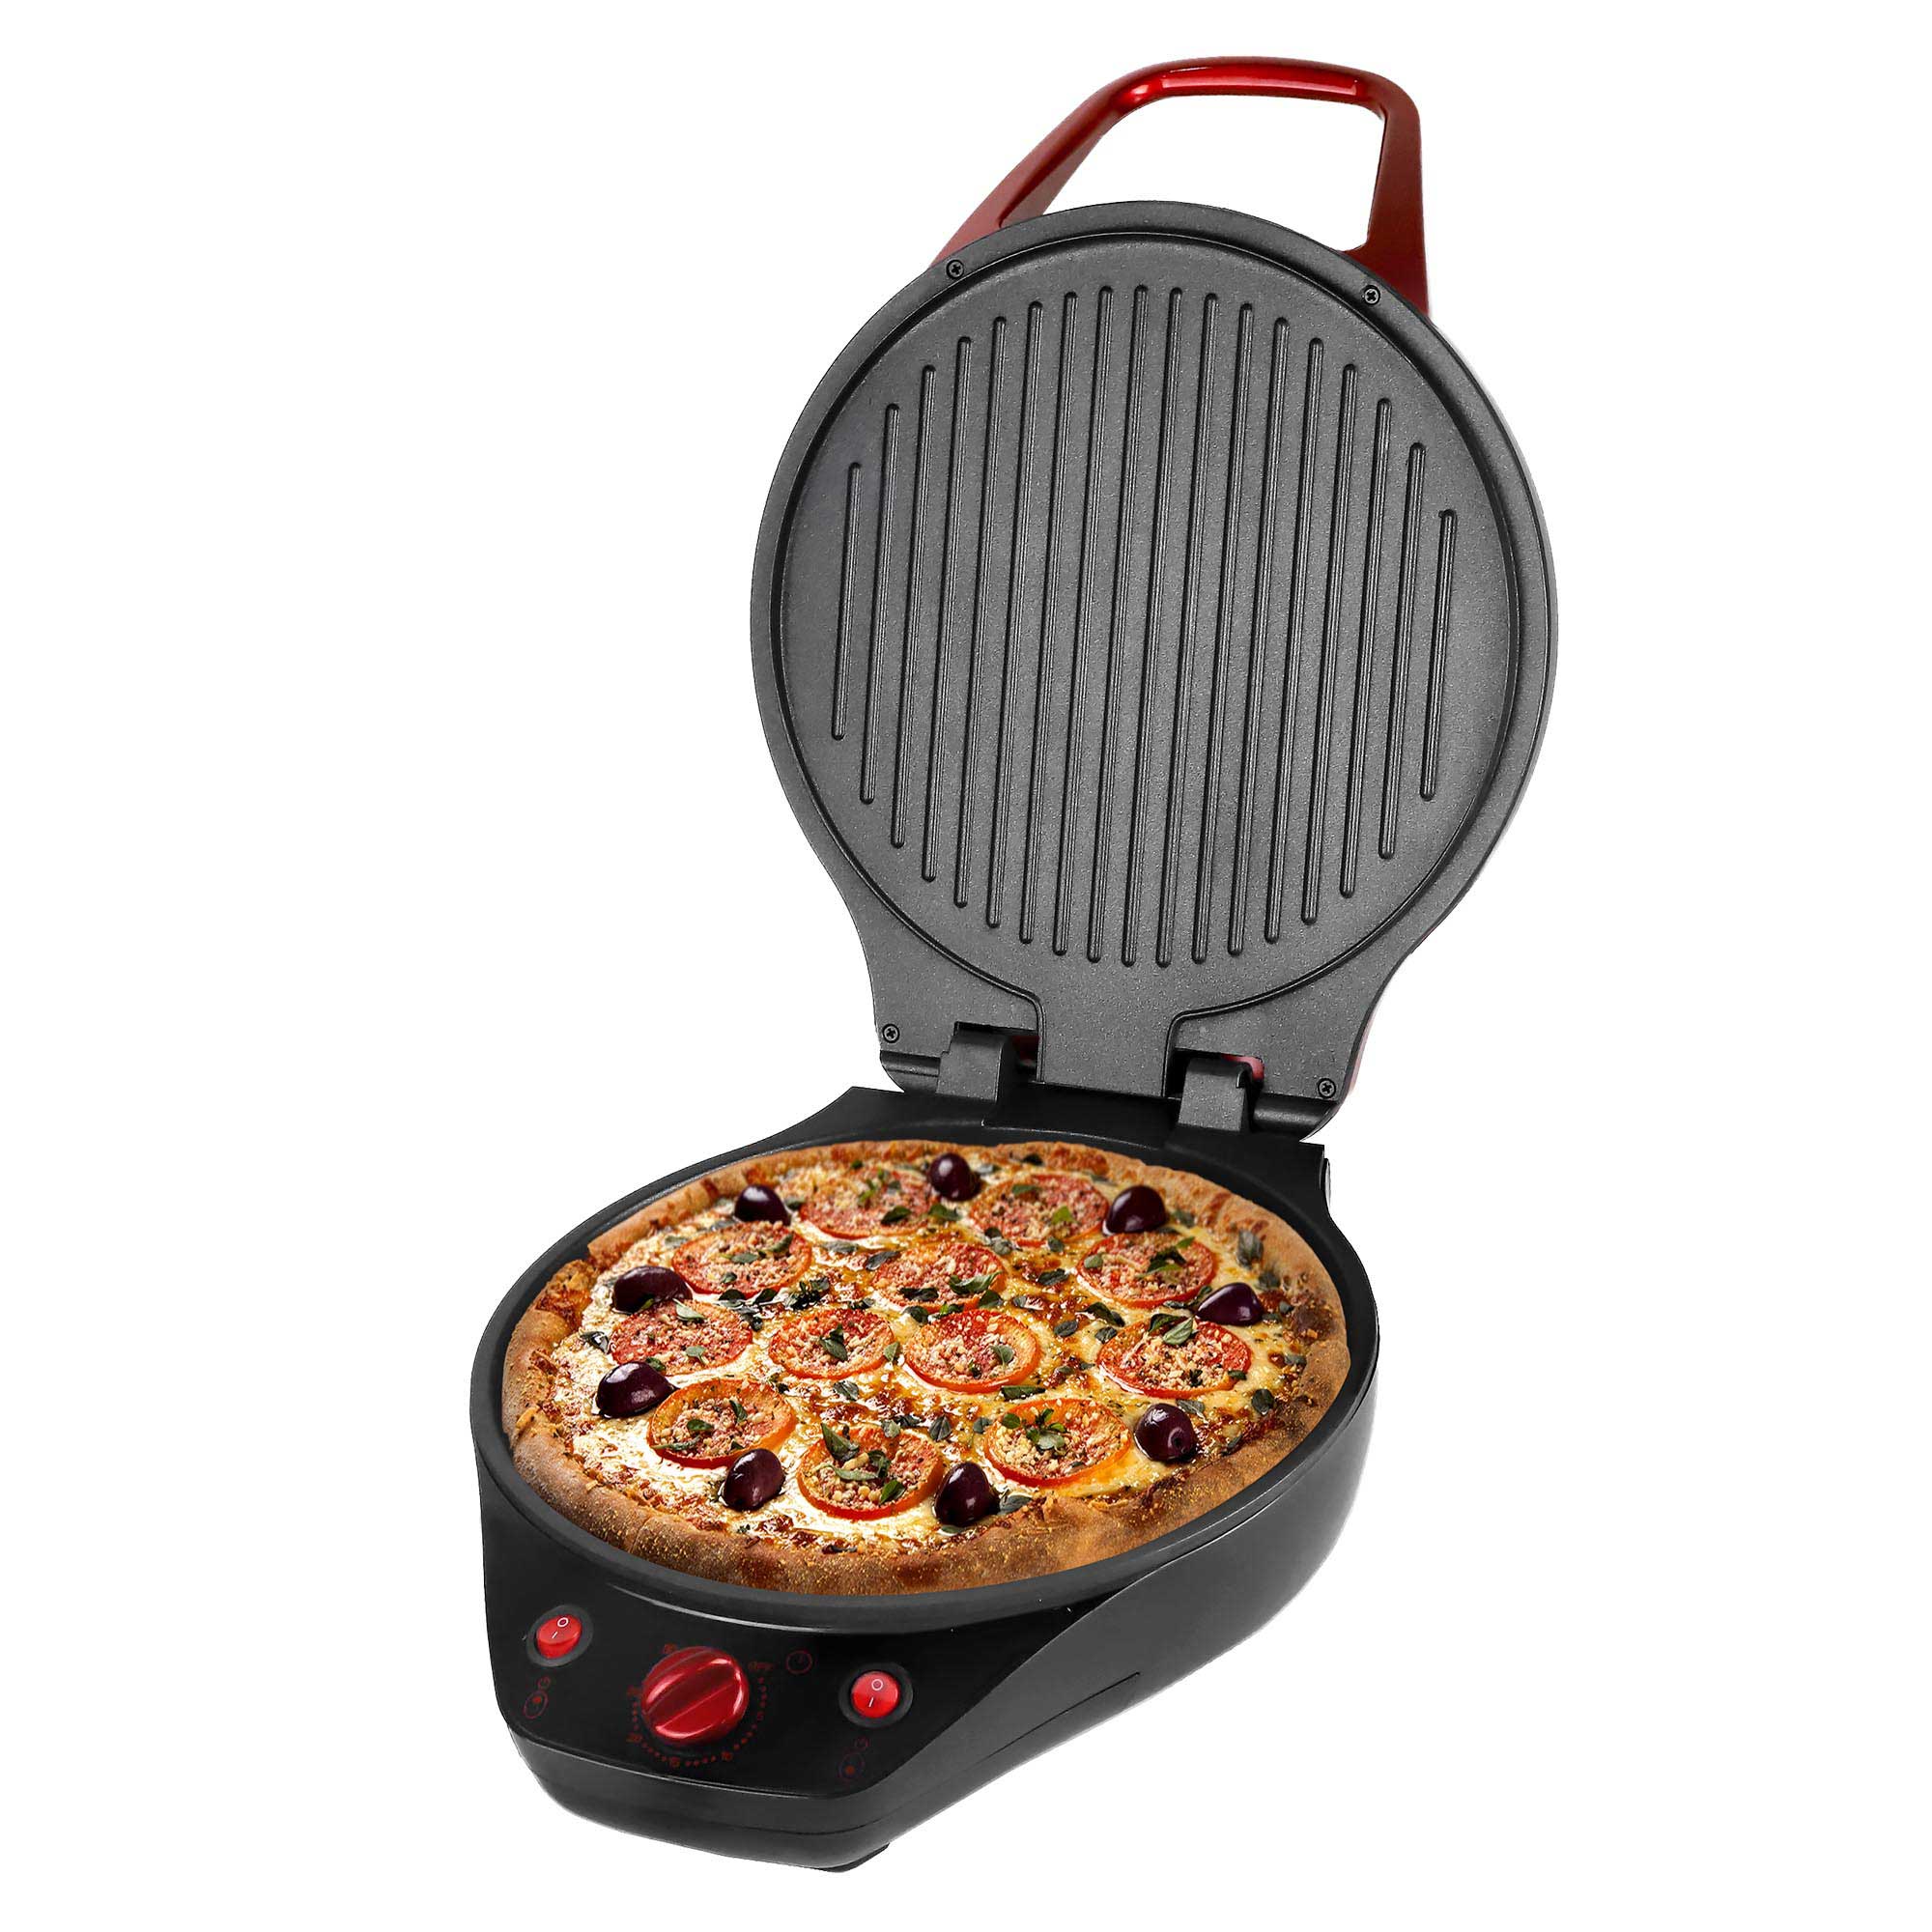 Brentwood TS-124R 12-Inch Non-Stick Pizza Maker and Grill with Timer, -  Brentwood Appliances